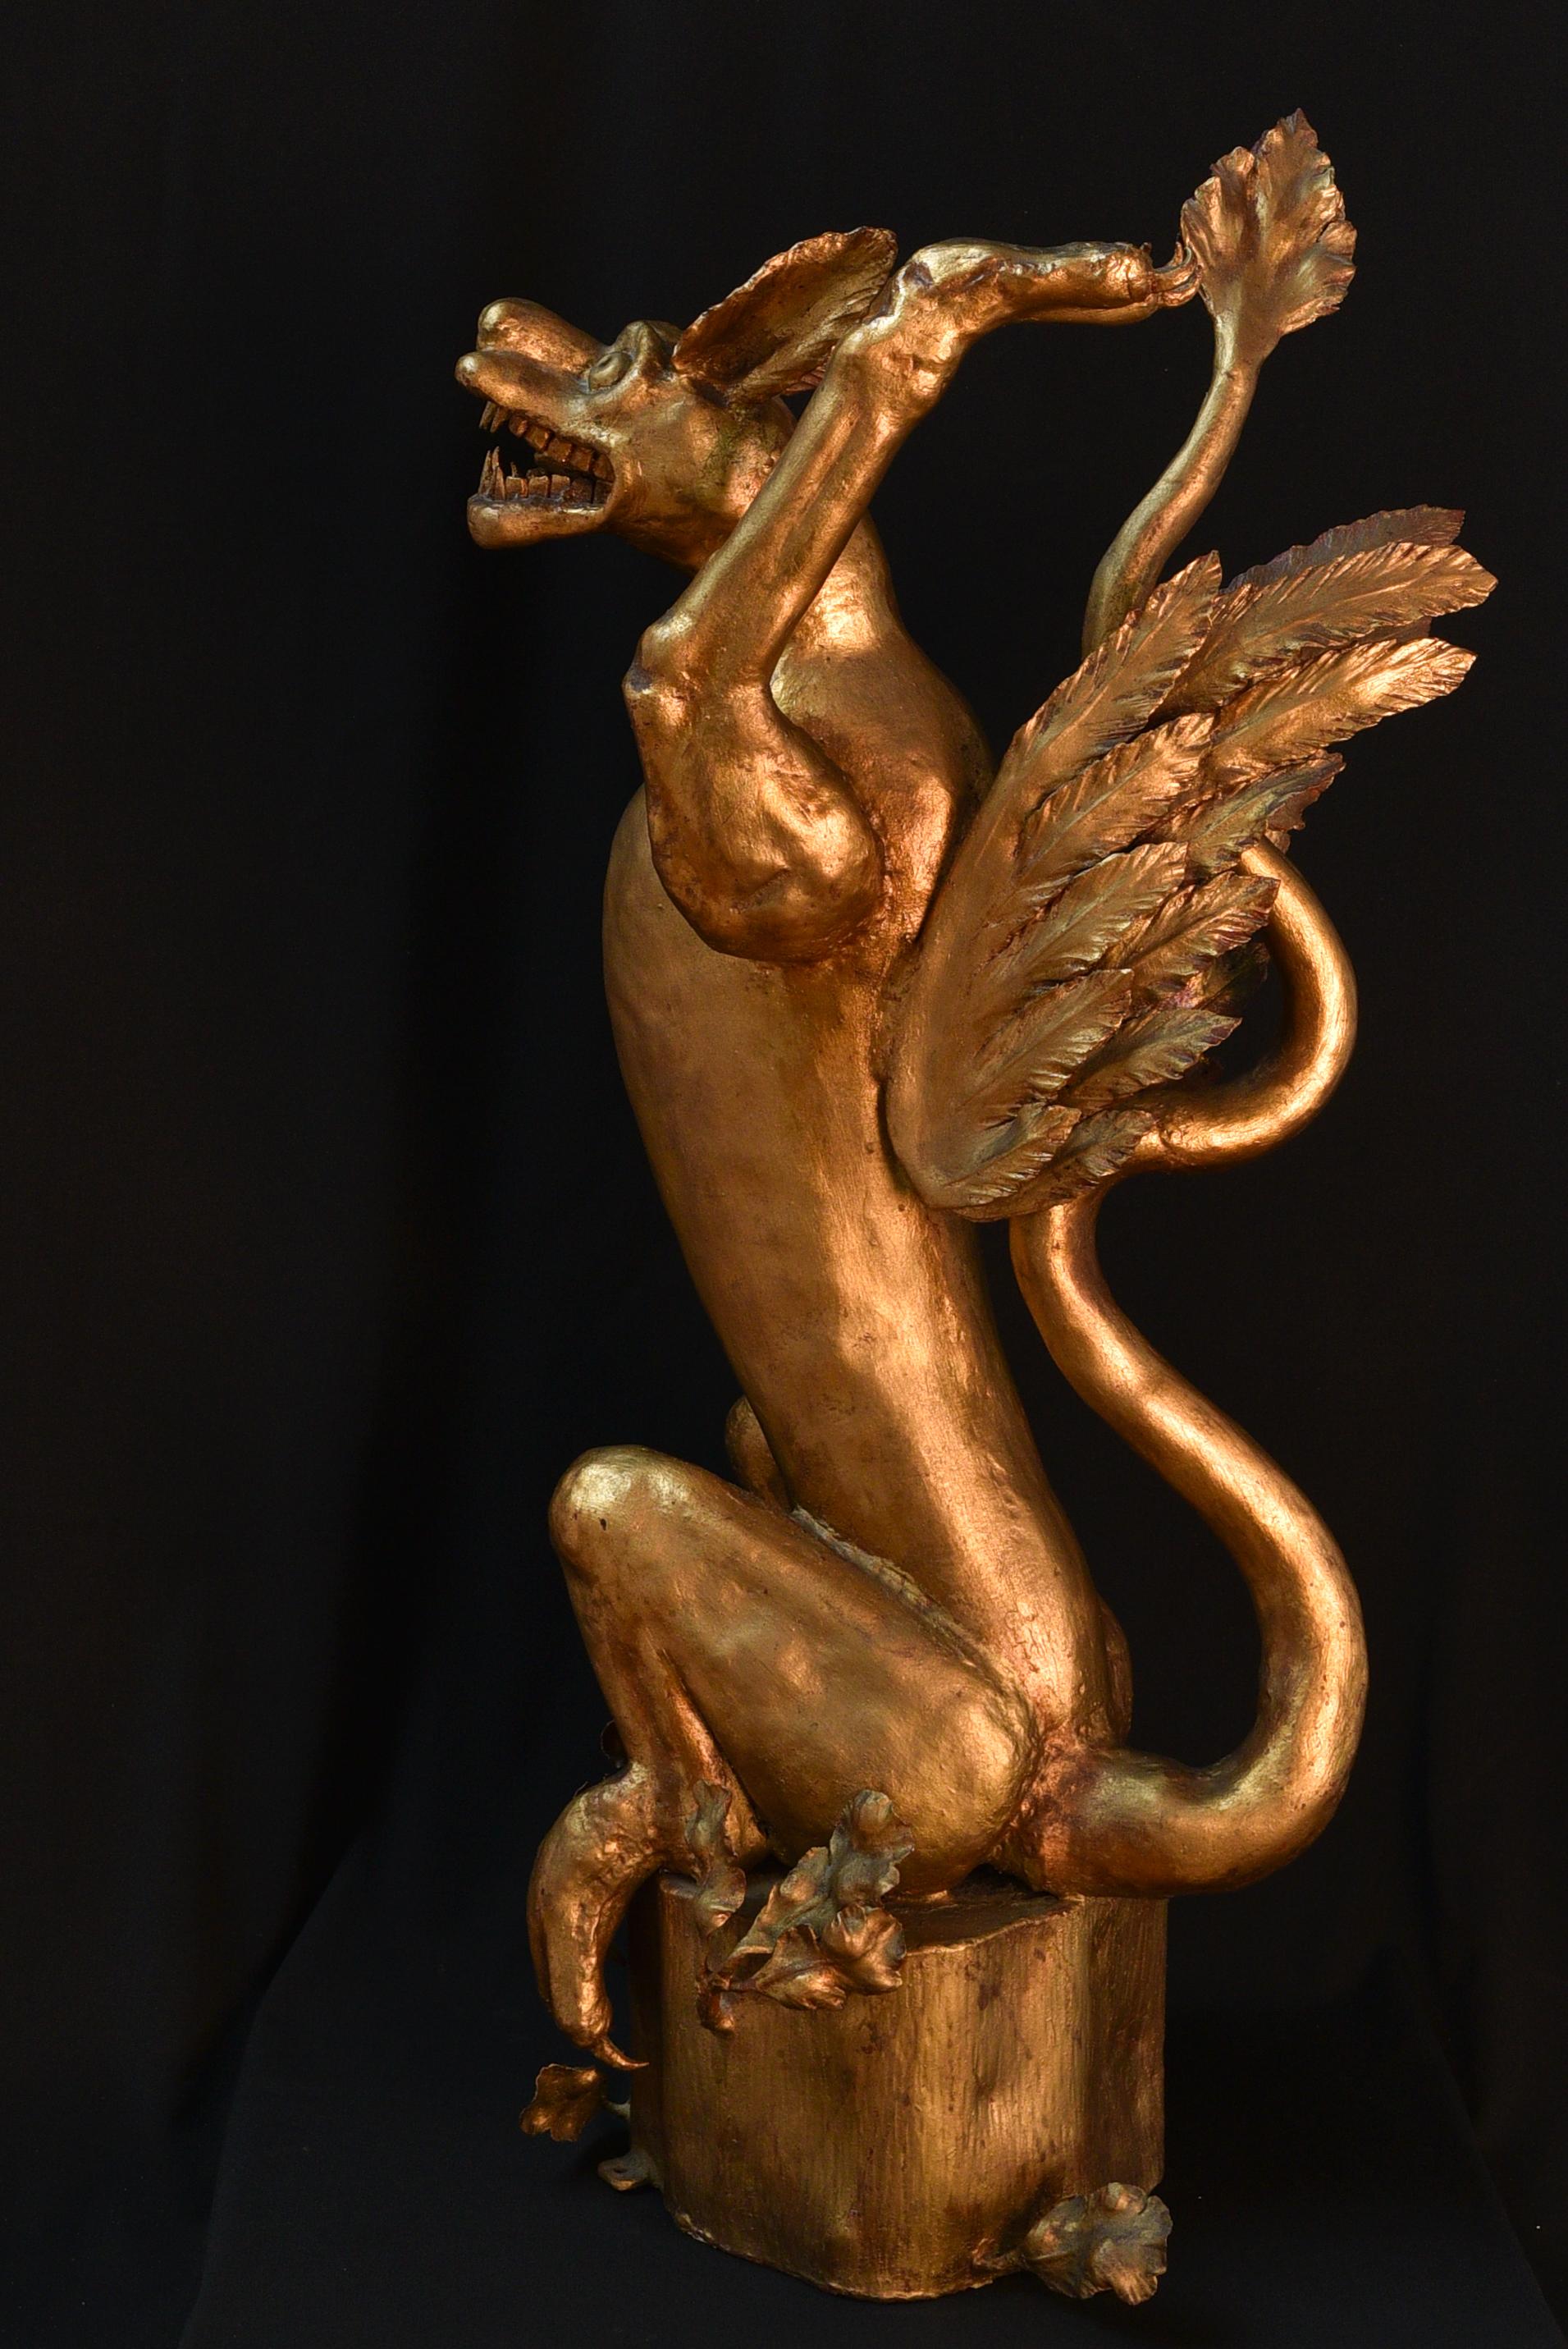 A griffin is a mythical creature, half eagle, half lion. The griffins used to guard the gold of the kinds. Represents ferocity, pride, wisdom, courage and power. 

This unique and rare piece dates from the 19th century and was made in Germany. The